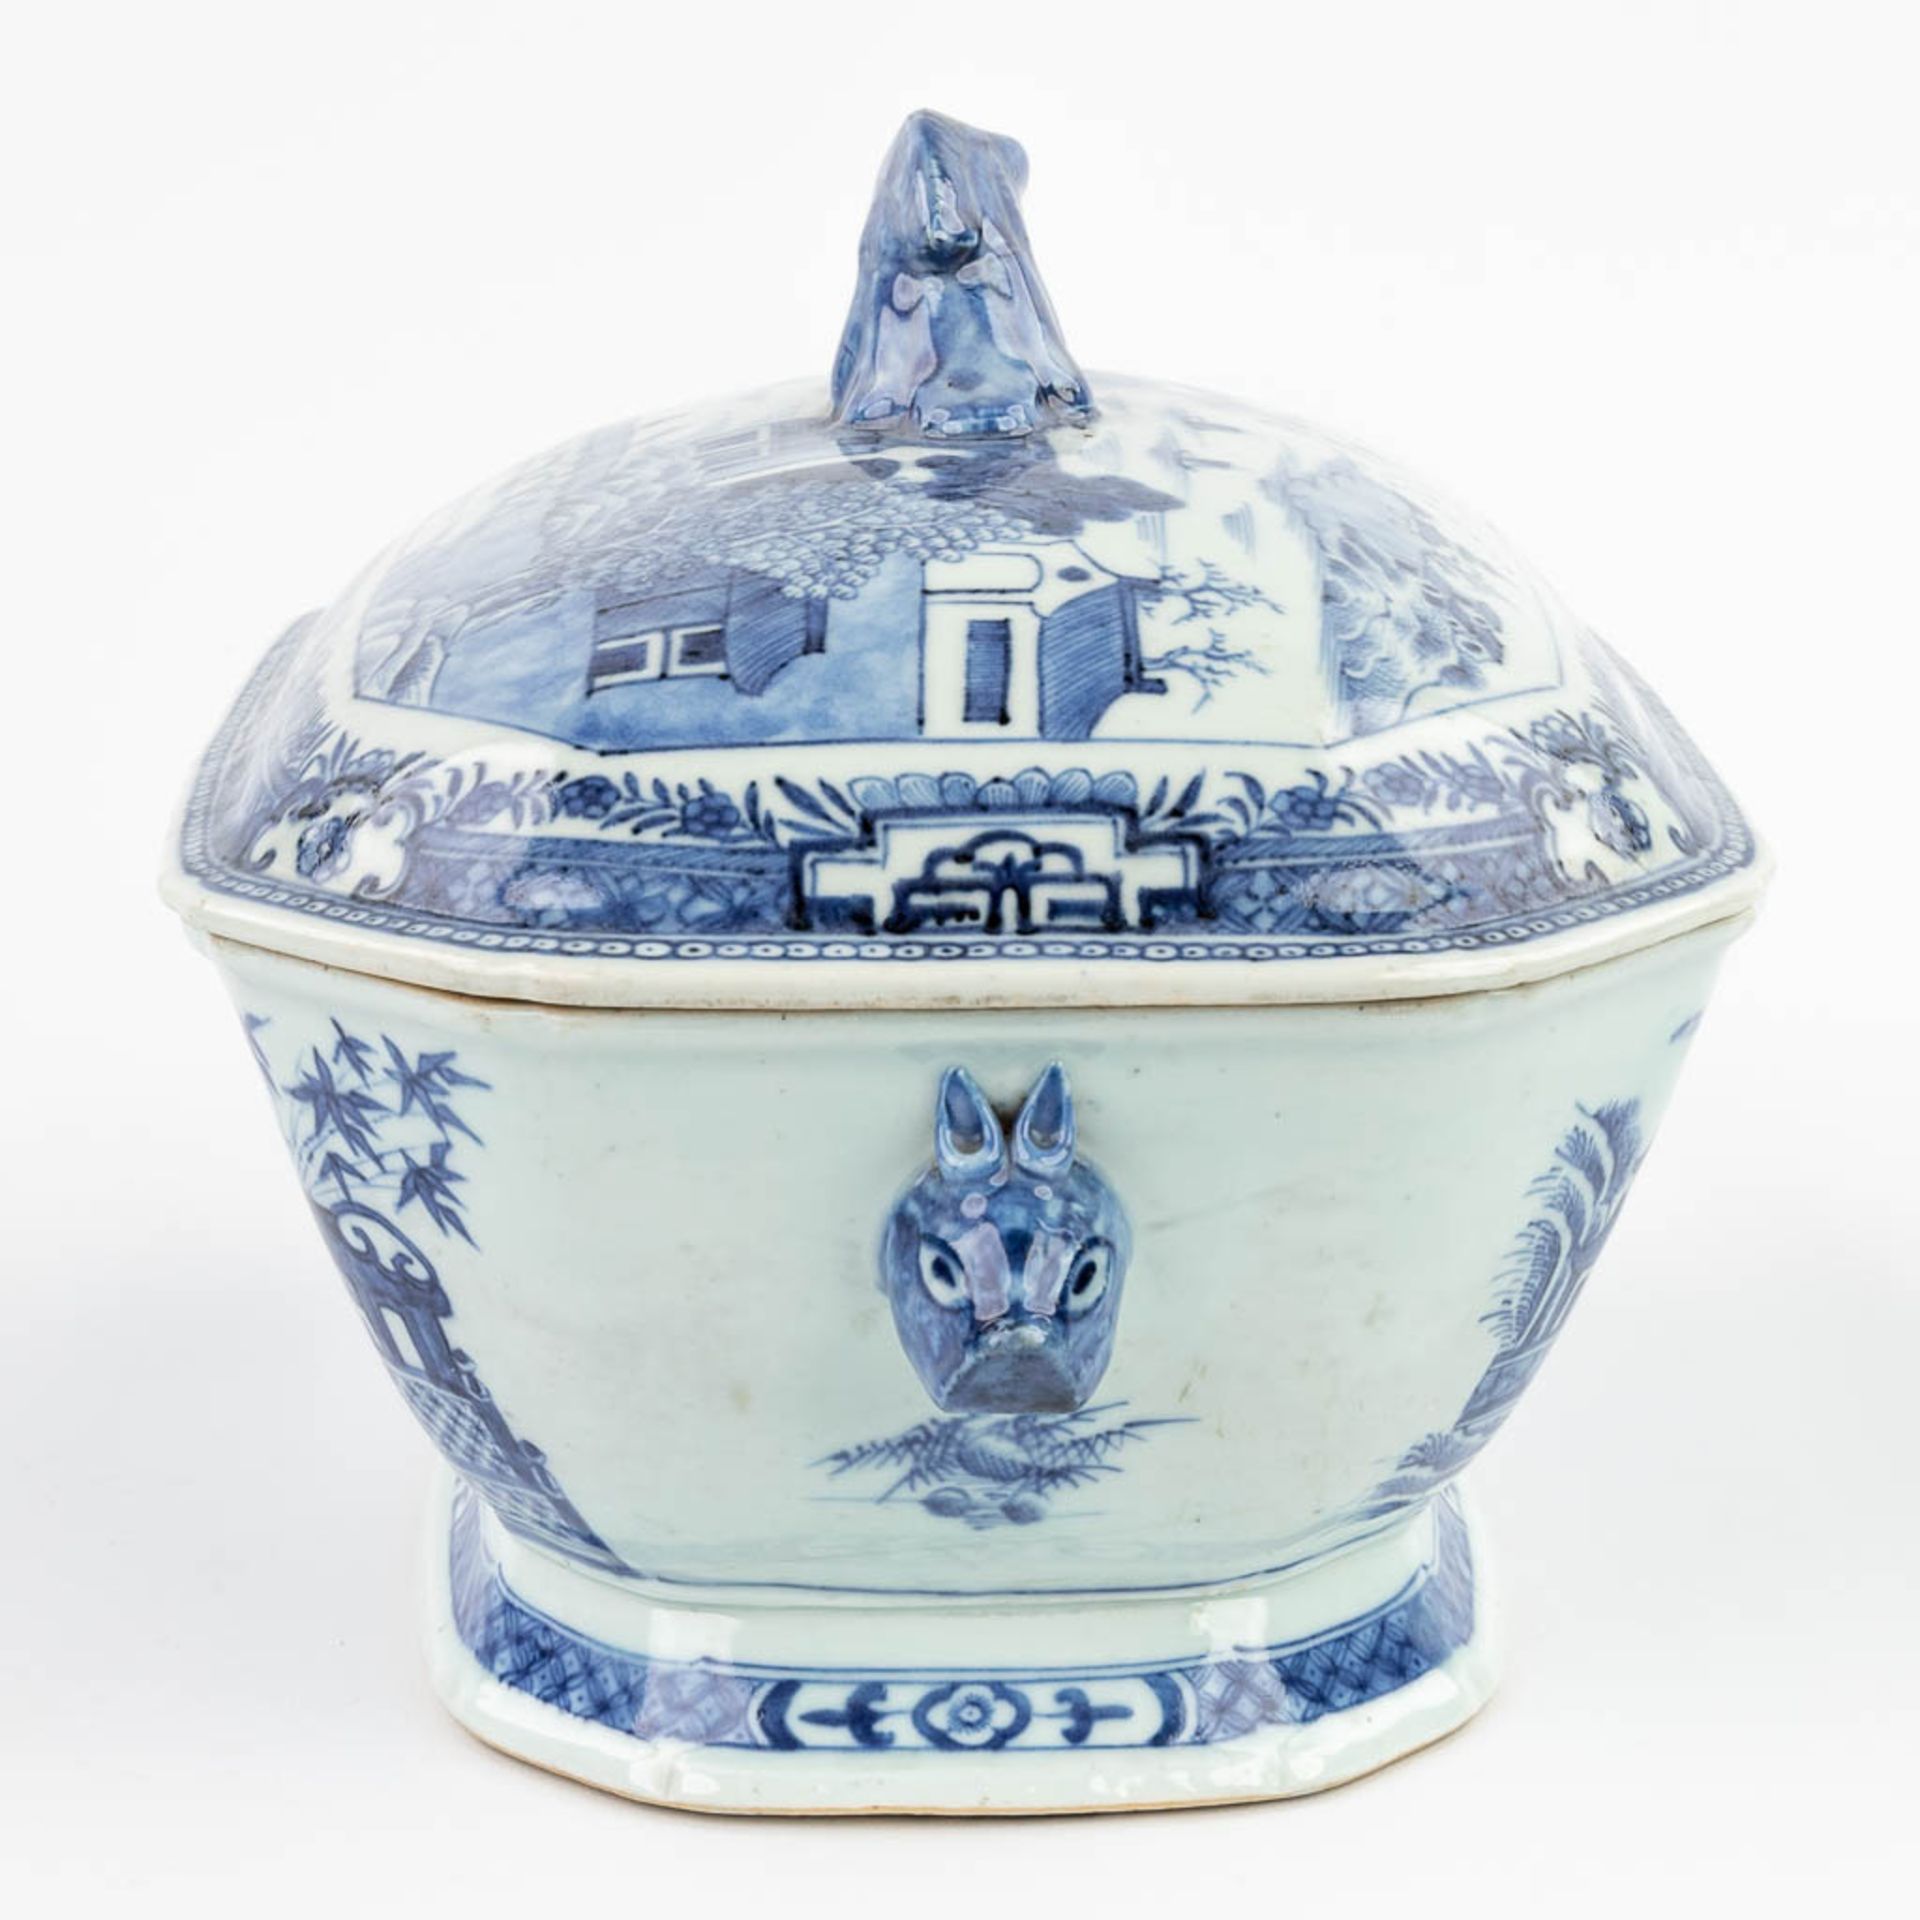 A Chinese soup tureen made of blue-white porcelain. (22 x 31 x 22 cm) - Image 5 of 15